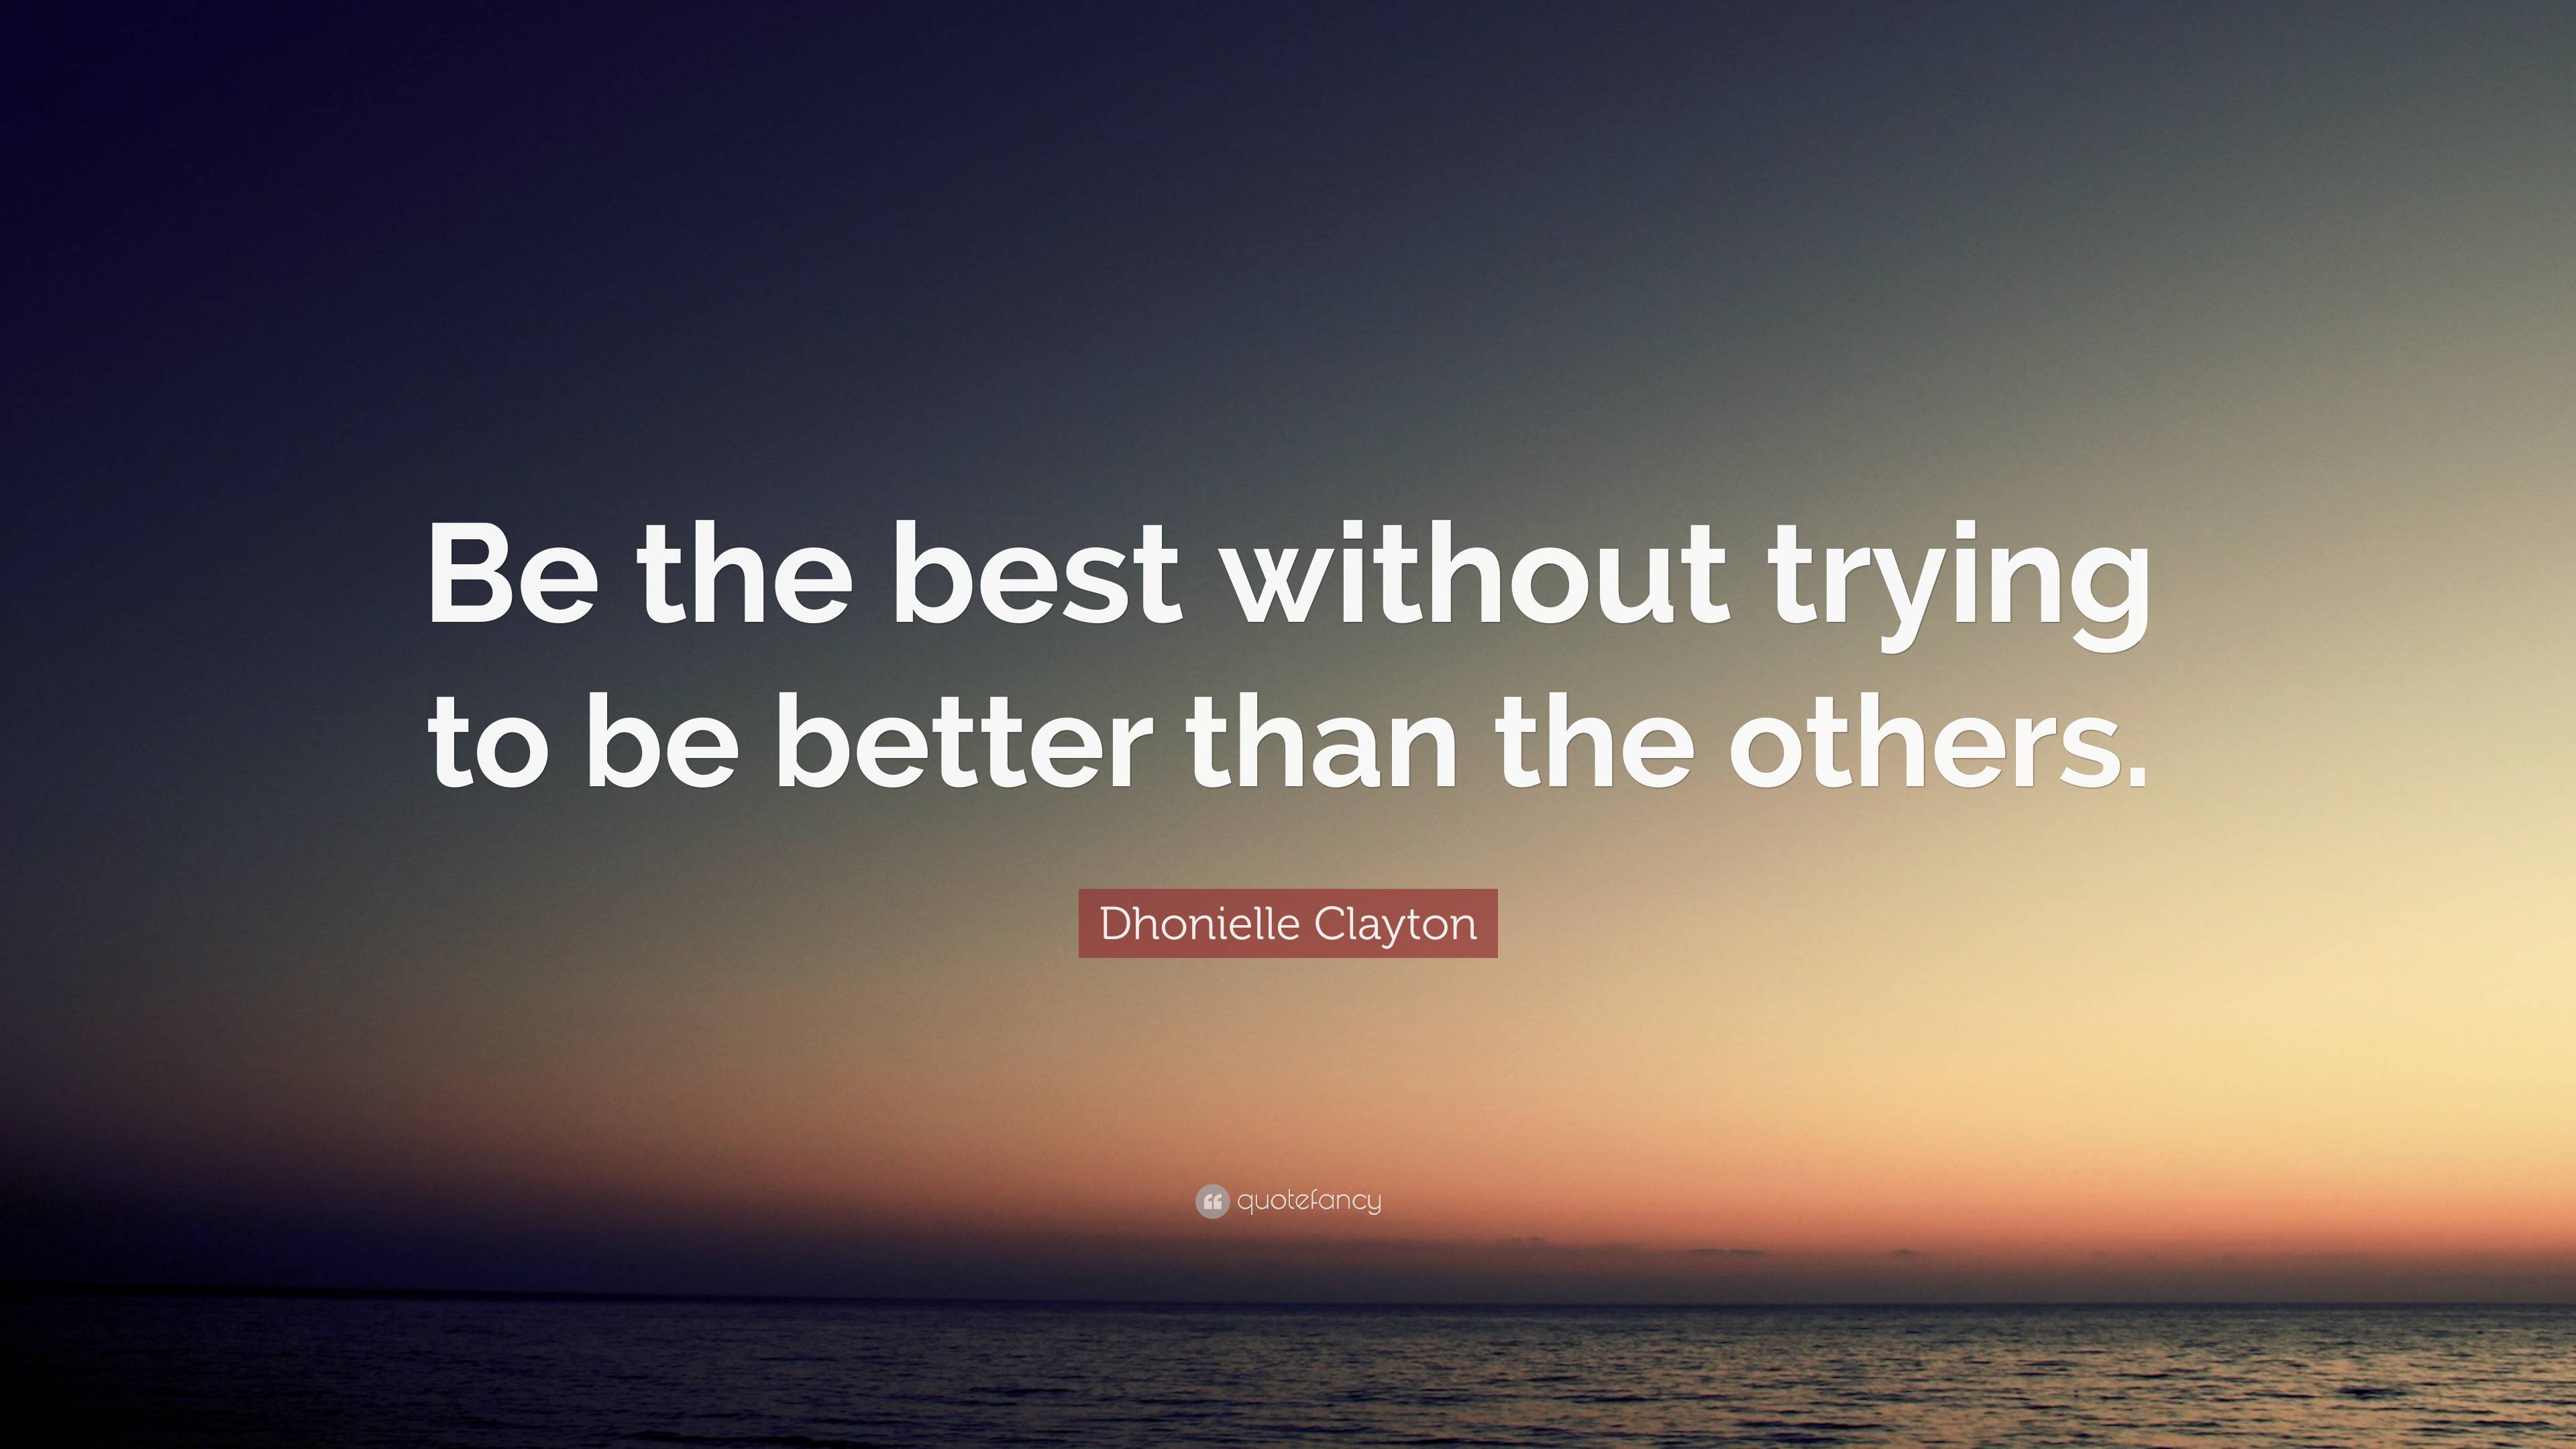 Dhonielle Clayton Quote: “Be the best without trying to be better than ...